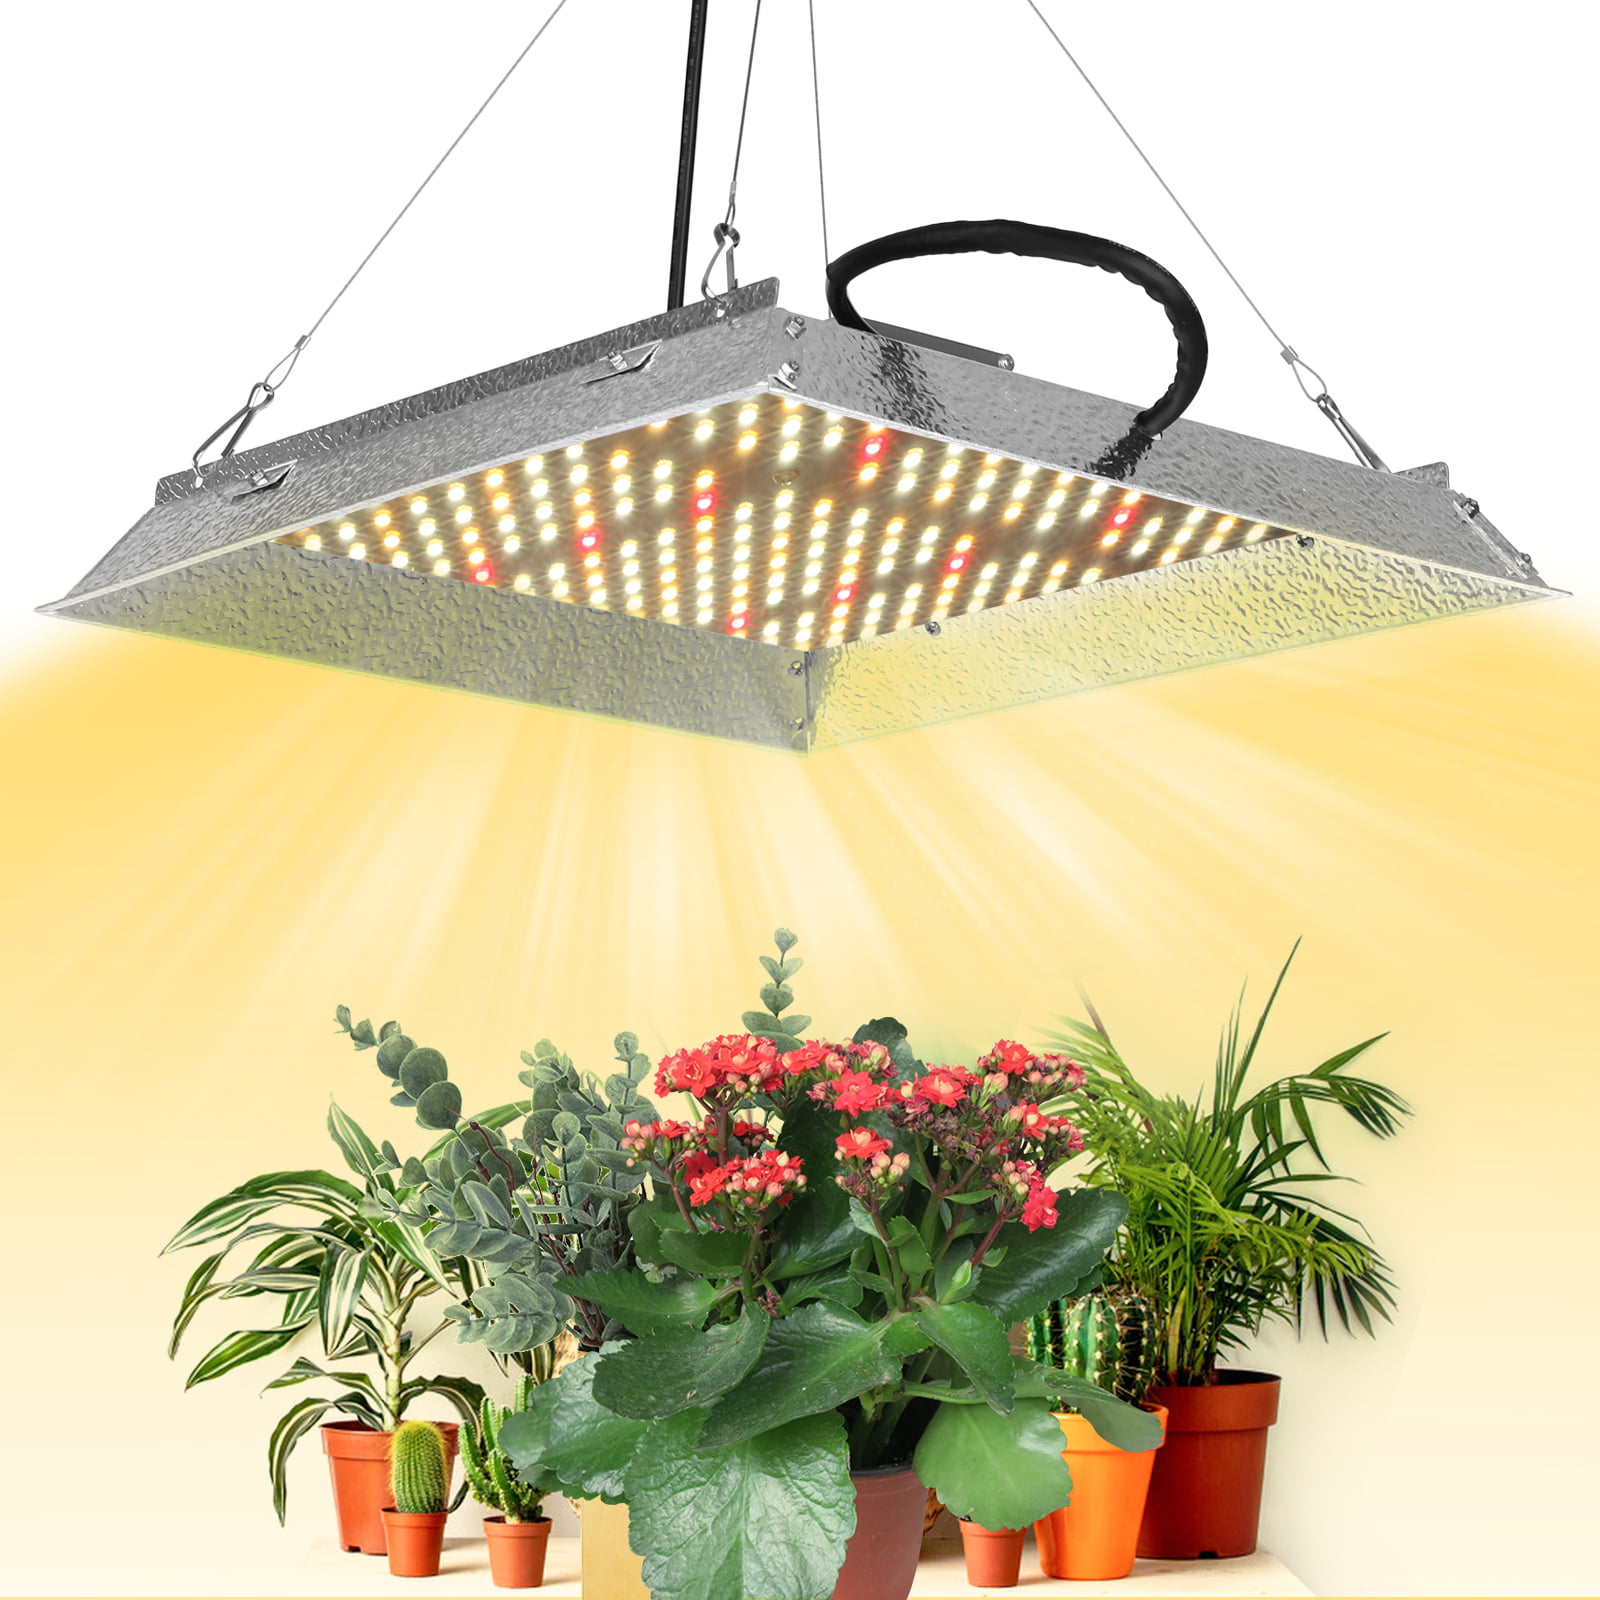 Details about   1000W LED Grow Light Panel Lamp Full Spectrum Hydroponic Plant Growing G 